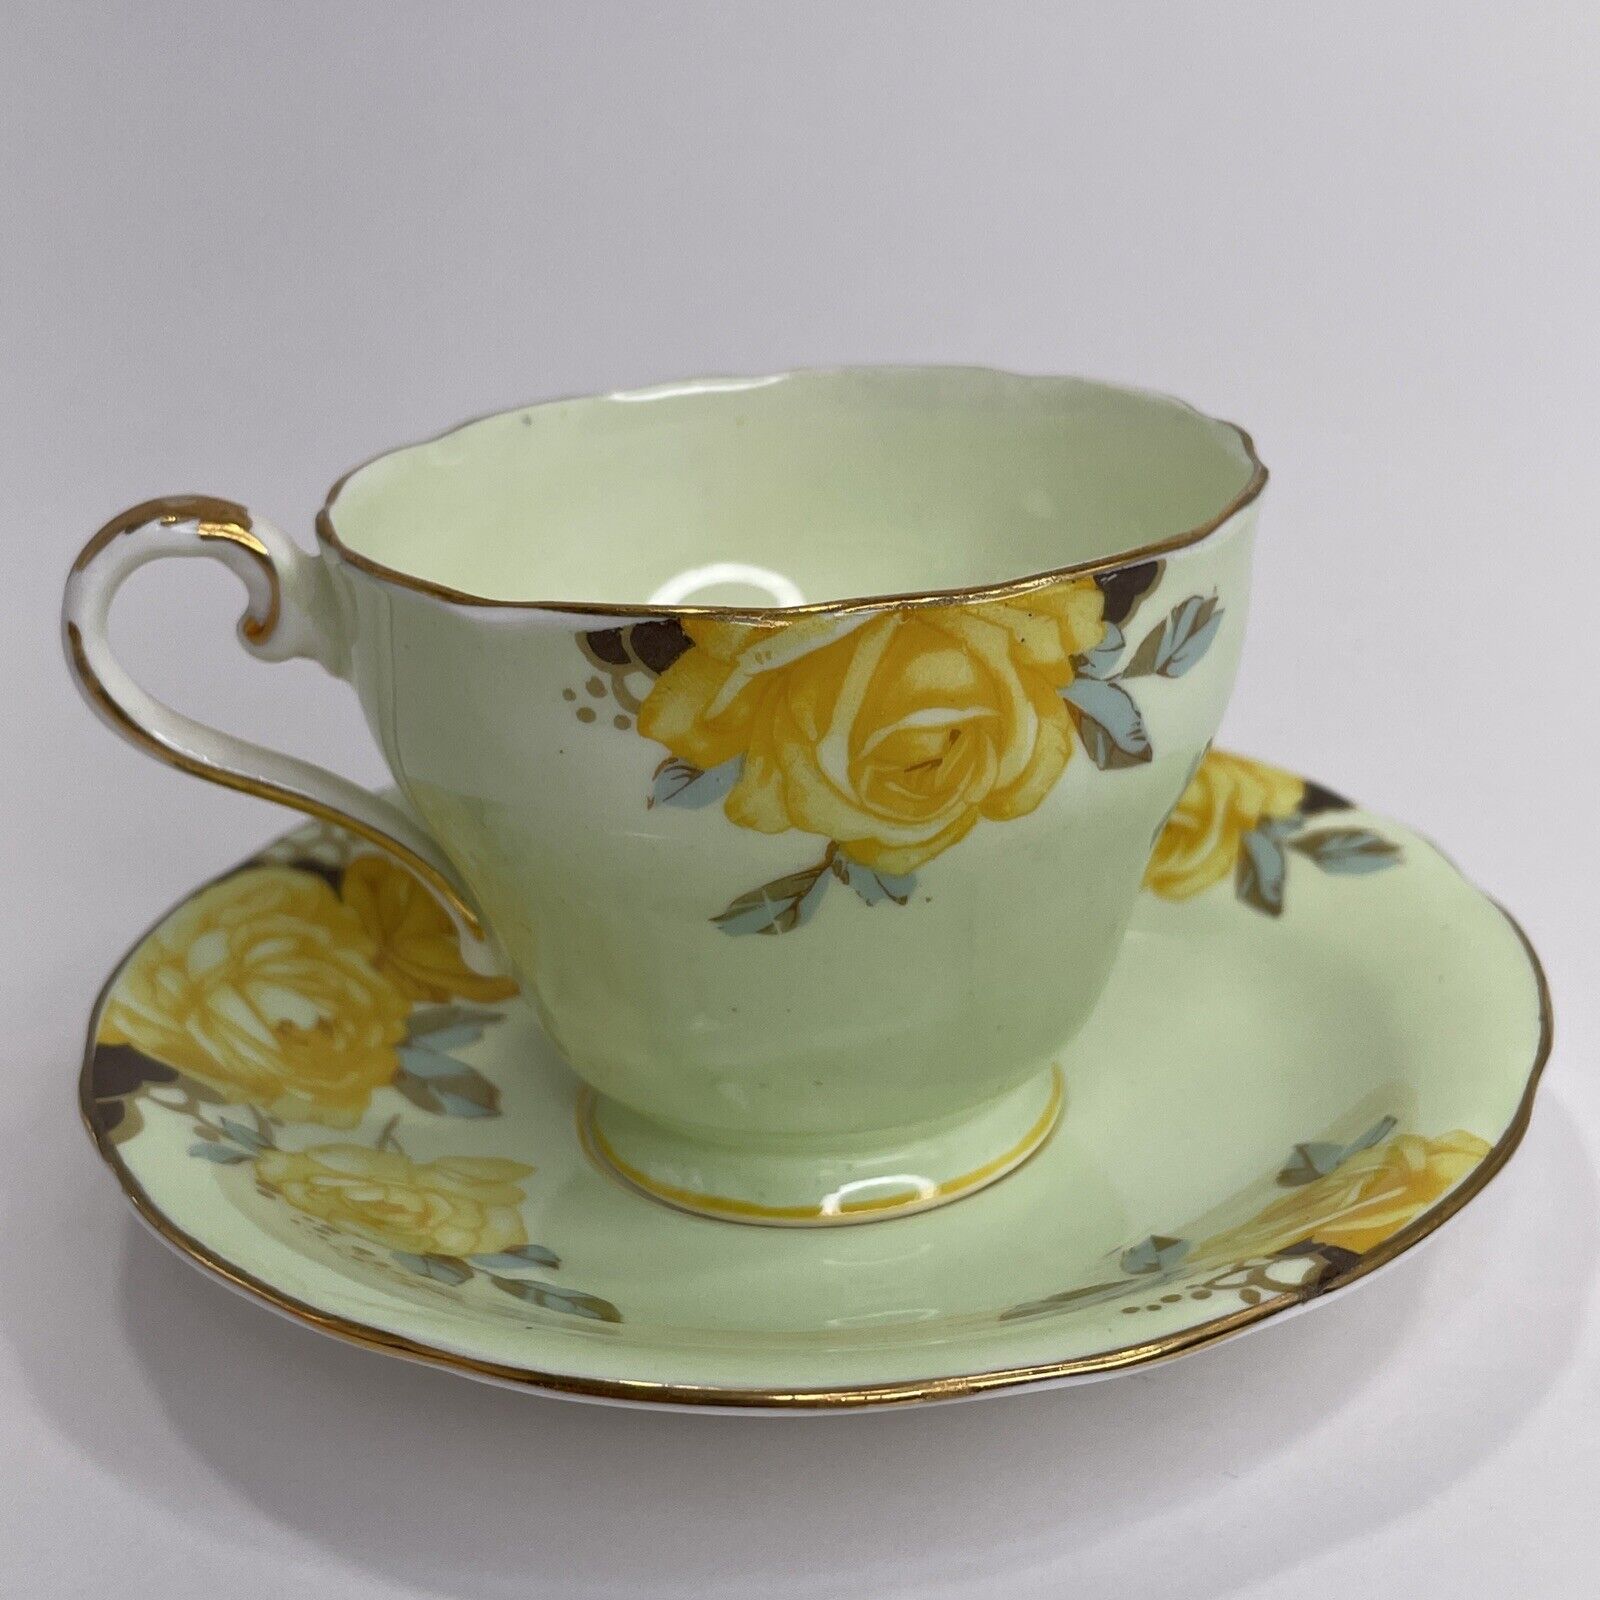 Antique 1920s 2pc Aynsley Tea Cup And Saucer Yellow Cabbage Rose Porcelain Rare!